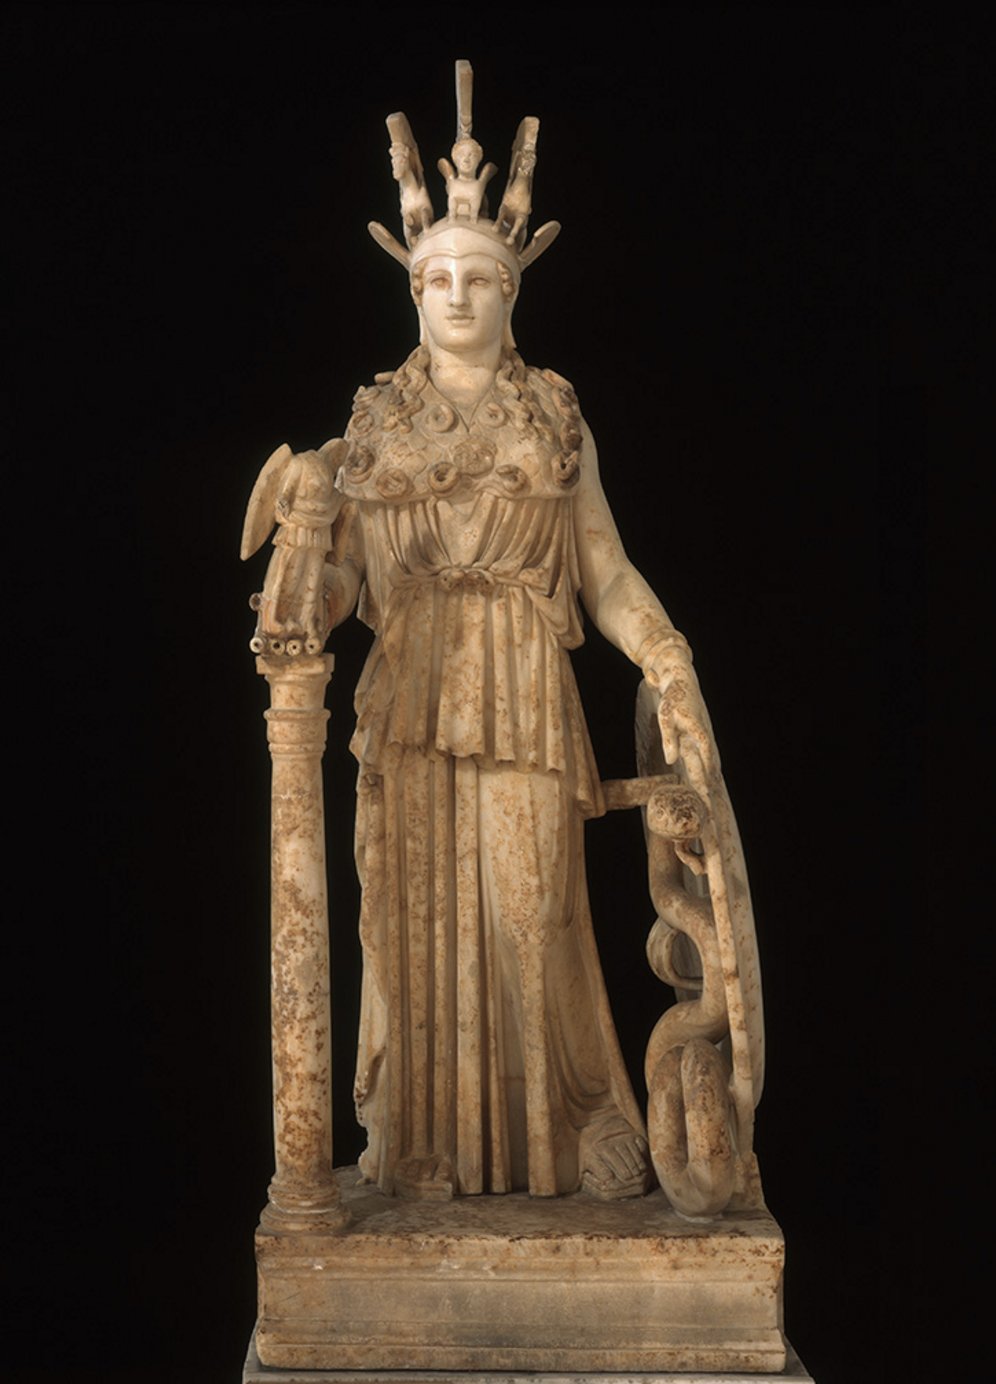 Varvakeion statuette, National Museum, Athens